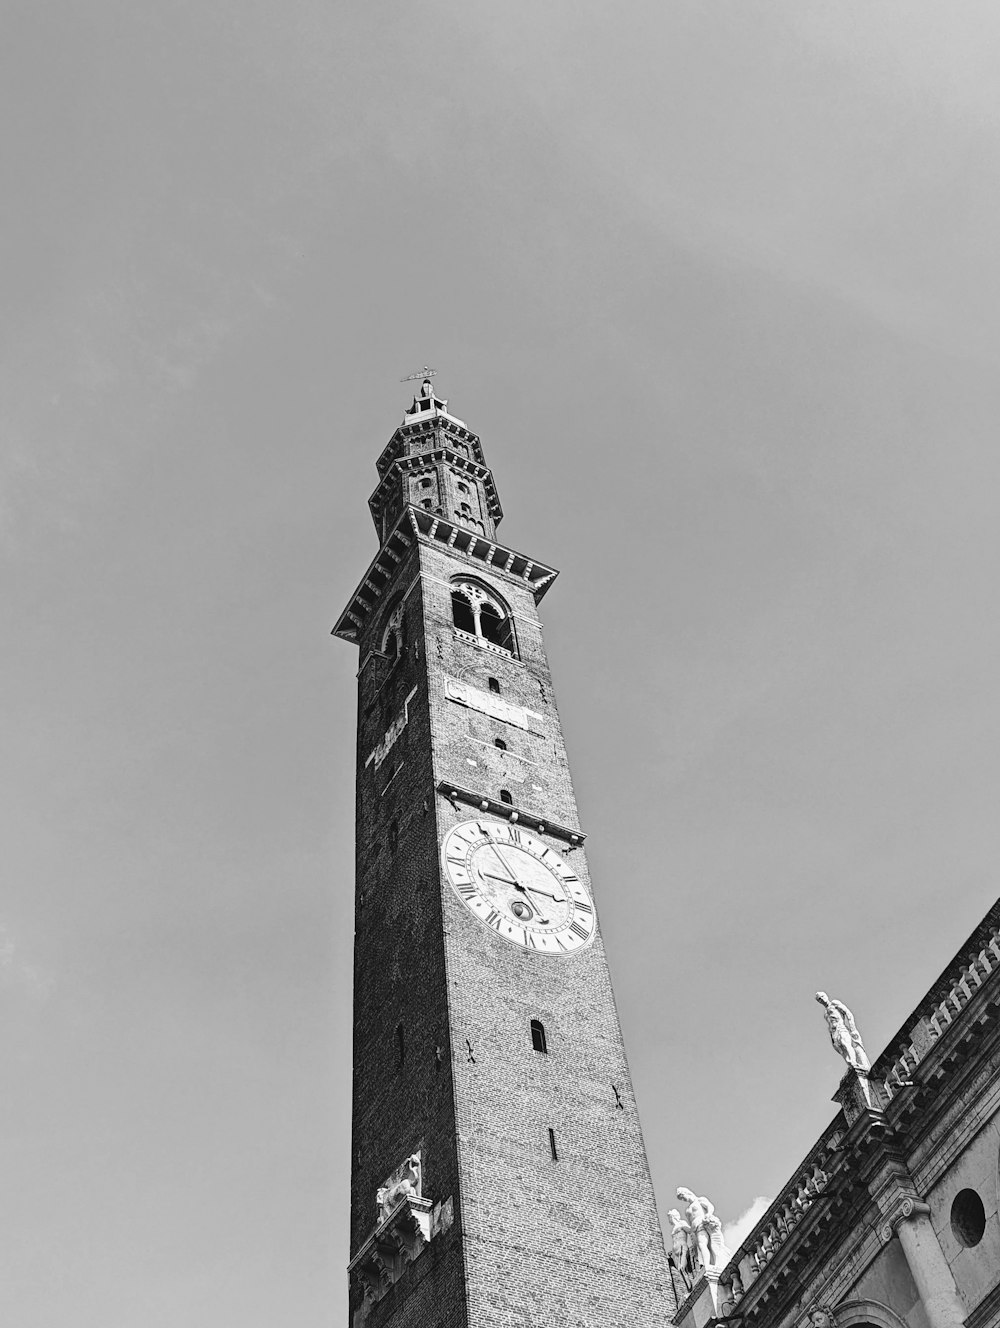 a tall clock tower towering over a city